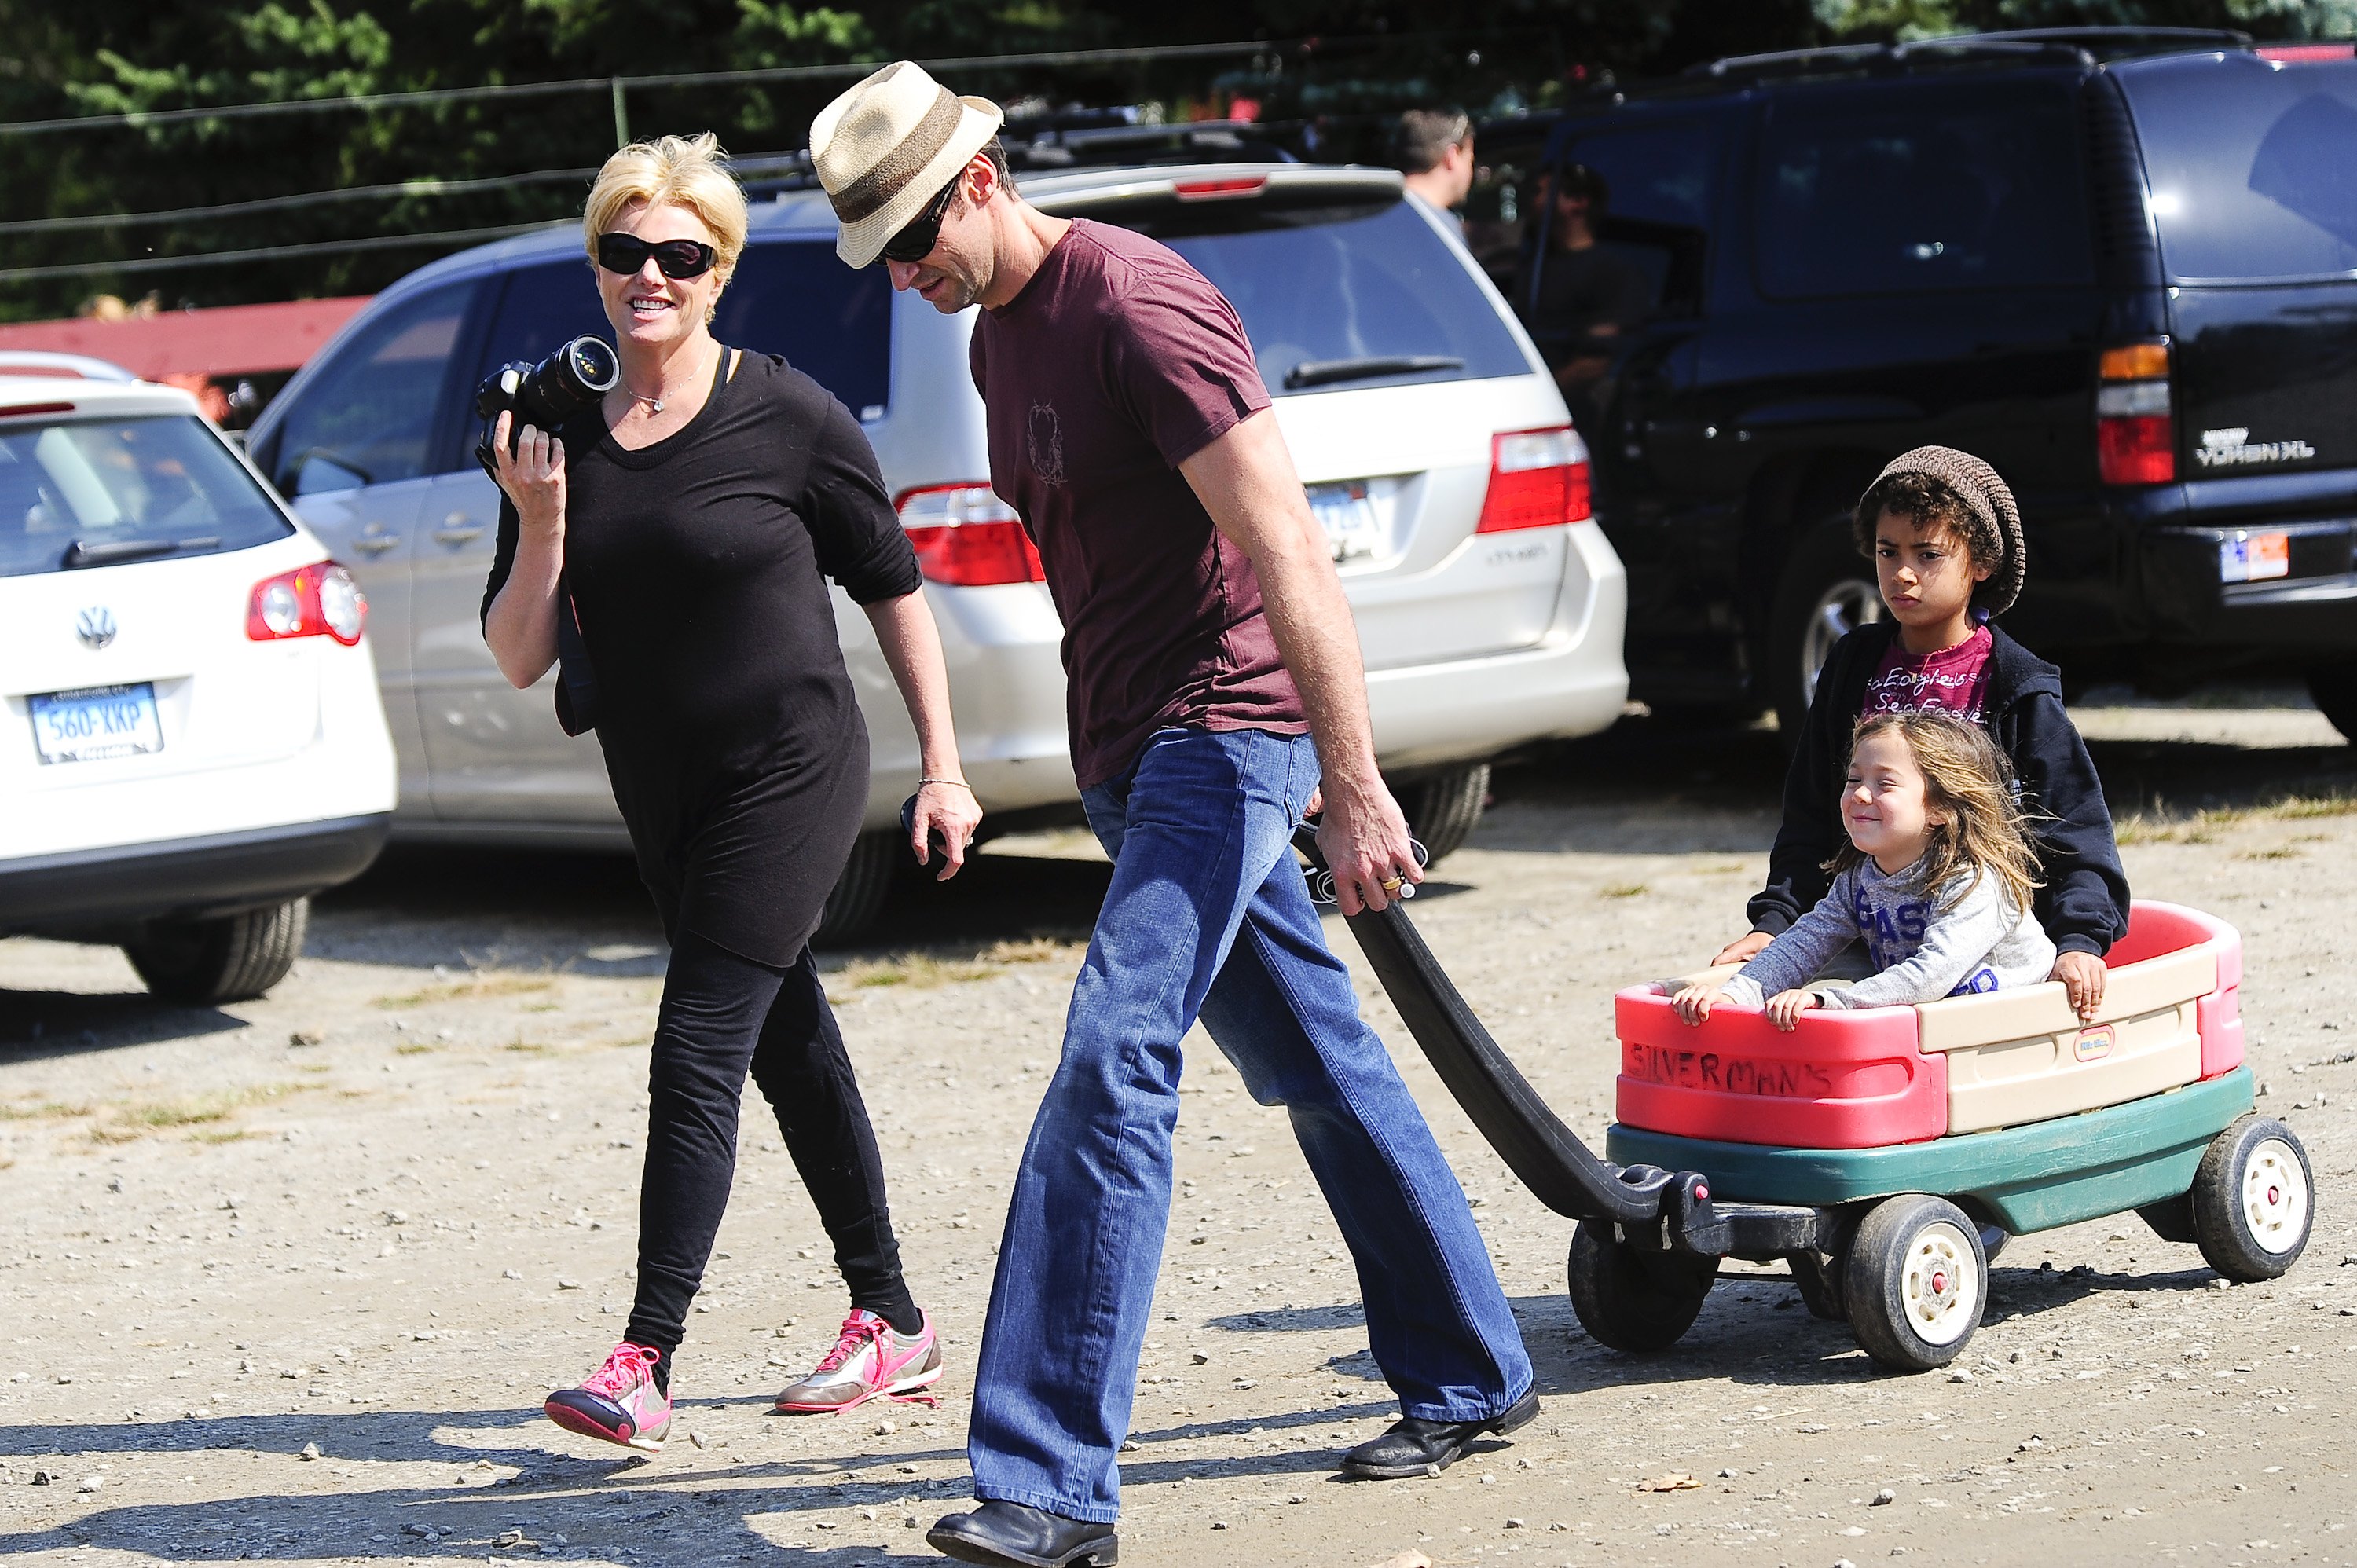 Actors Deborra-Lee Furness, Hugh Jackman and their children Ava Jackman, and Oscar Jackman visit the Silverman Farm on September 28, 2009 in Easton, Connecticut. | Source: Getty Images